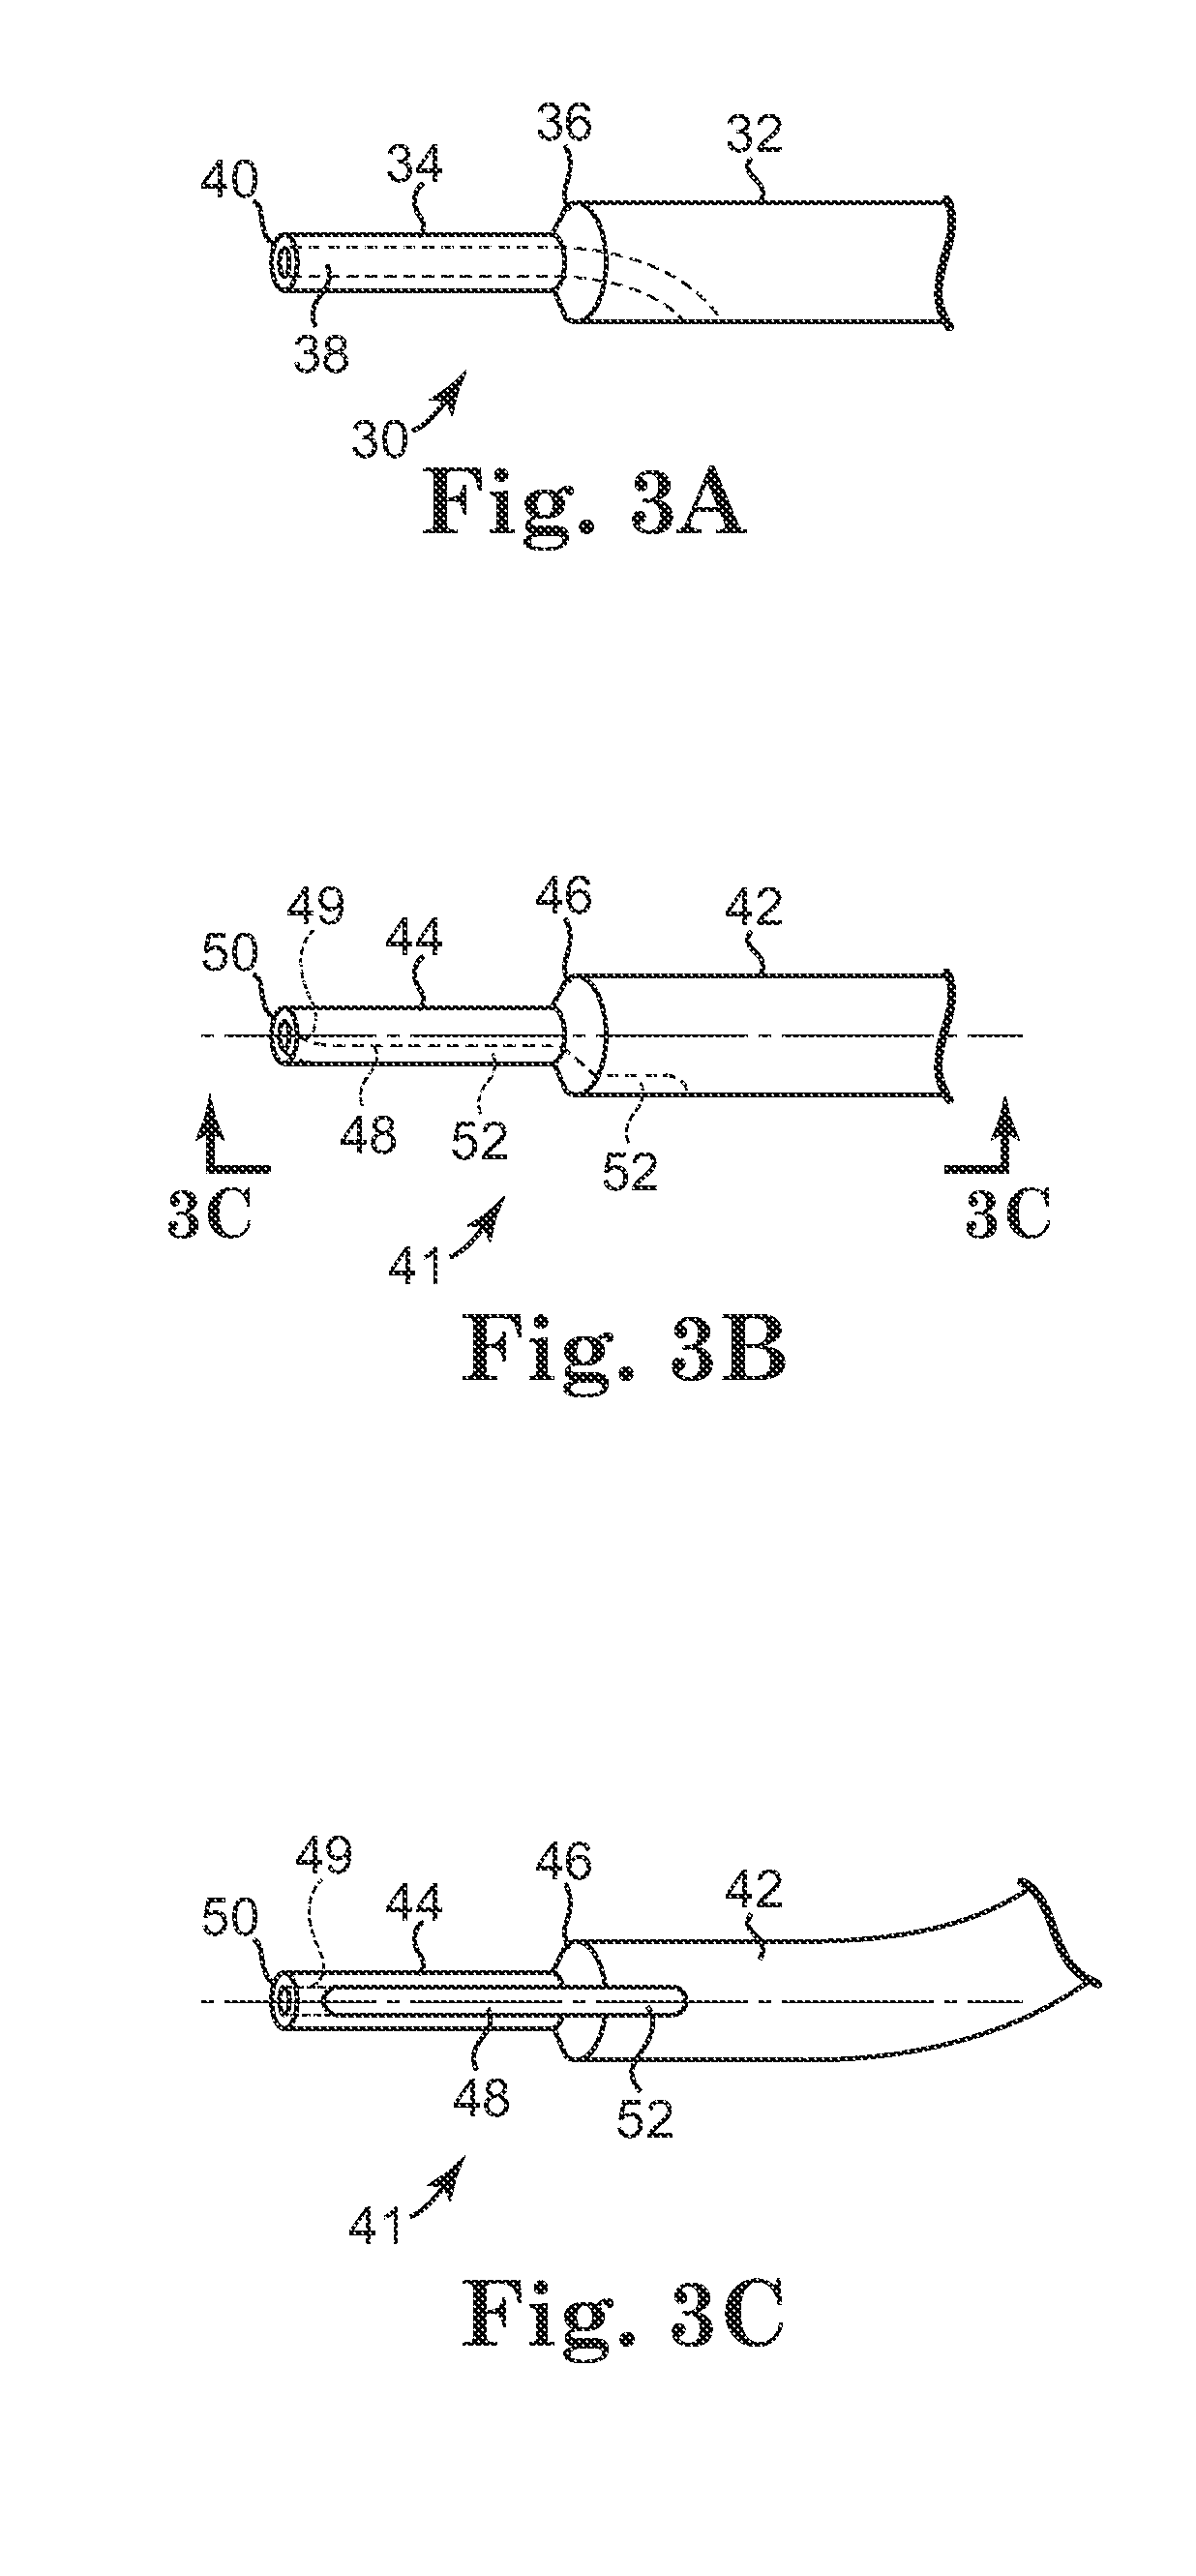 Surgical Articles and Methods for Treating Pelvic Conditions